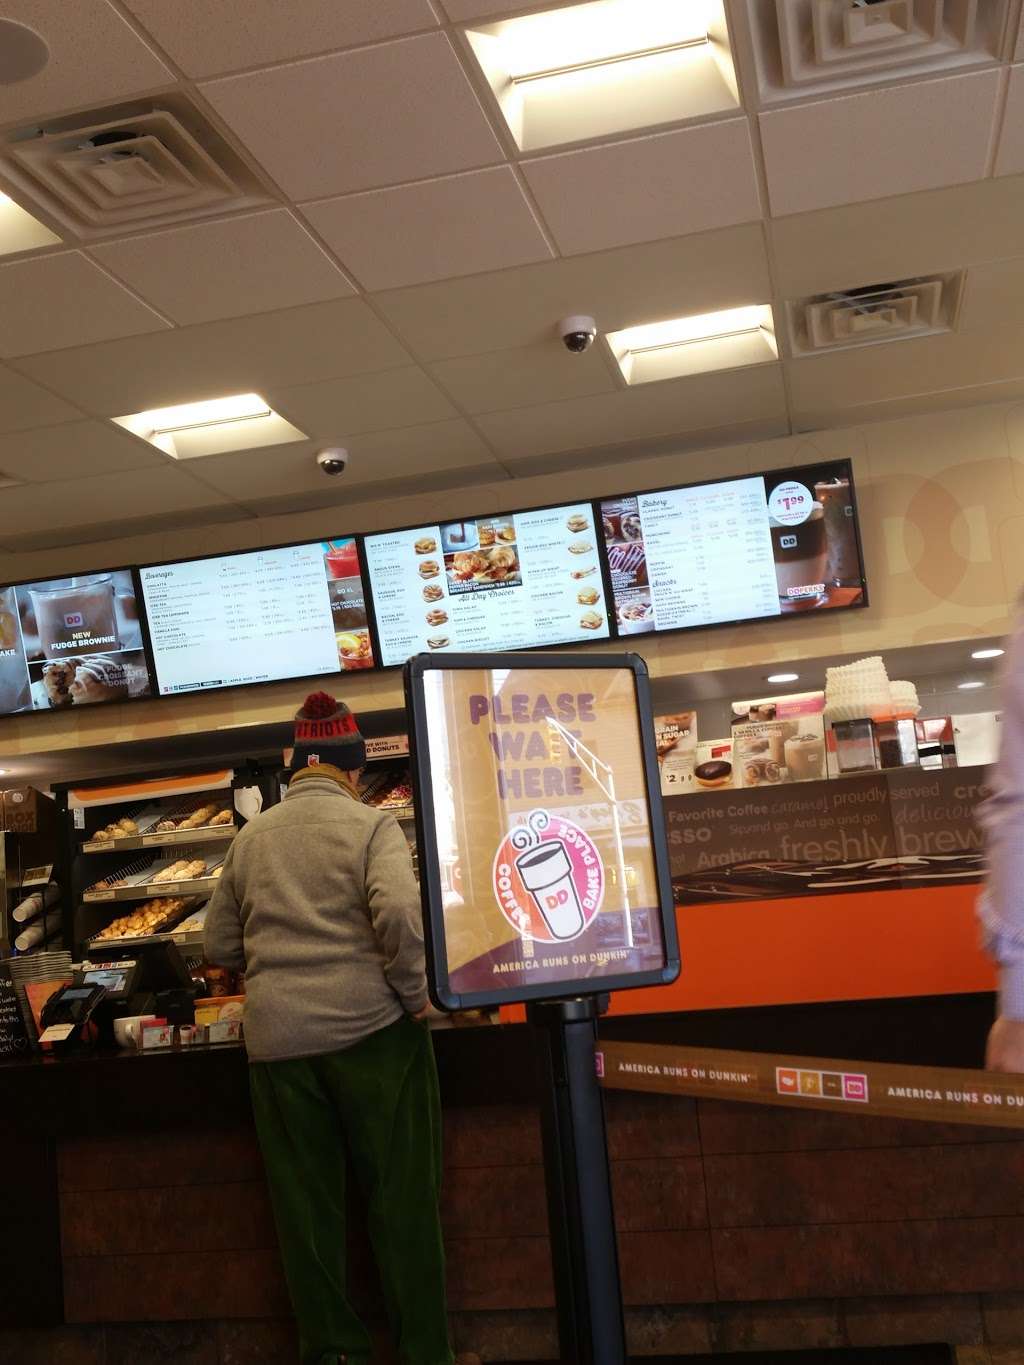 Dunkin Donuts - cafe  | Photo 9 of 10 | Address: 93 Valley Rd, Clifton, NJ 07013, USA | Phone: (973) 278-1574